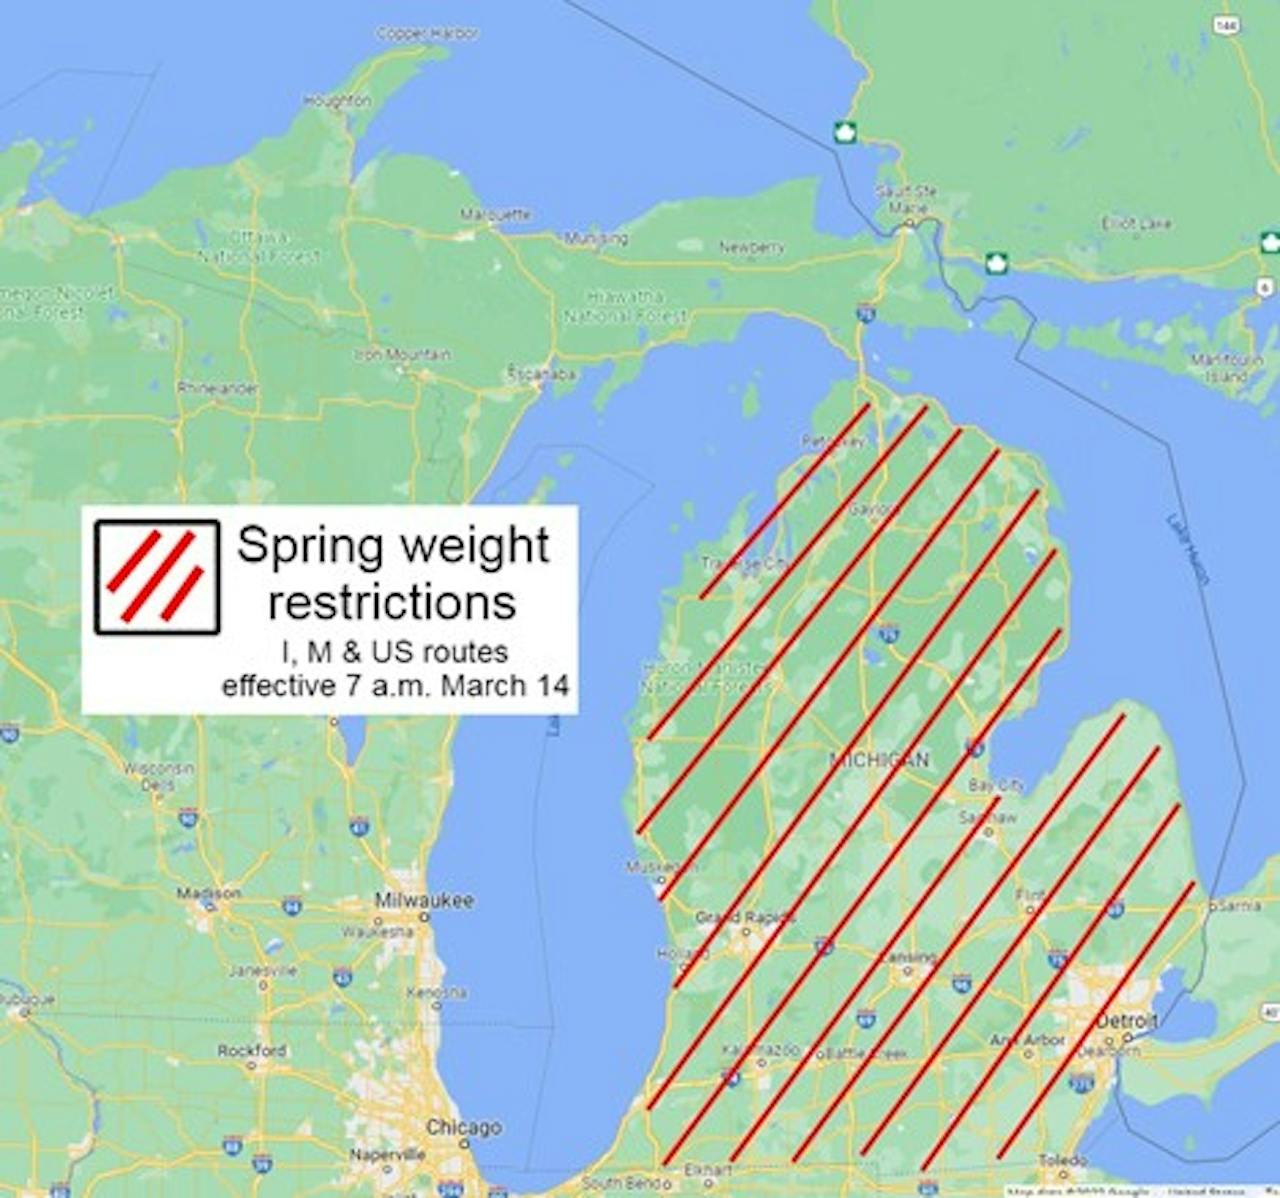 Michigan DOT is expanding its spring weight restrictions to cover up to the Mackinac Bridge.